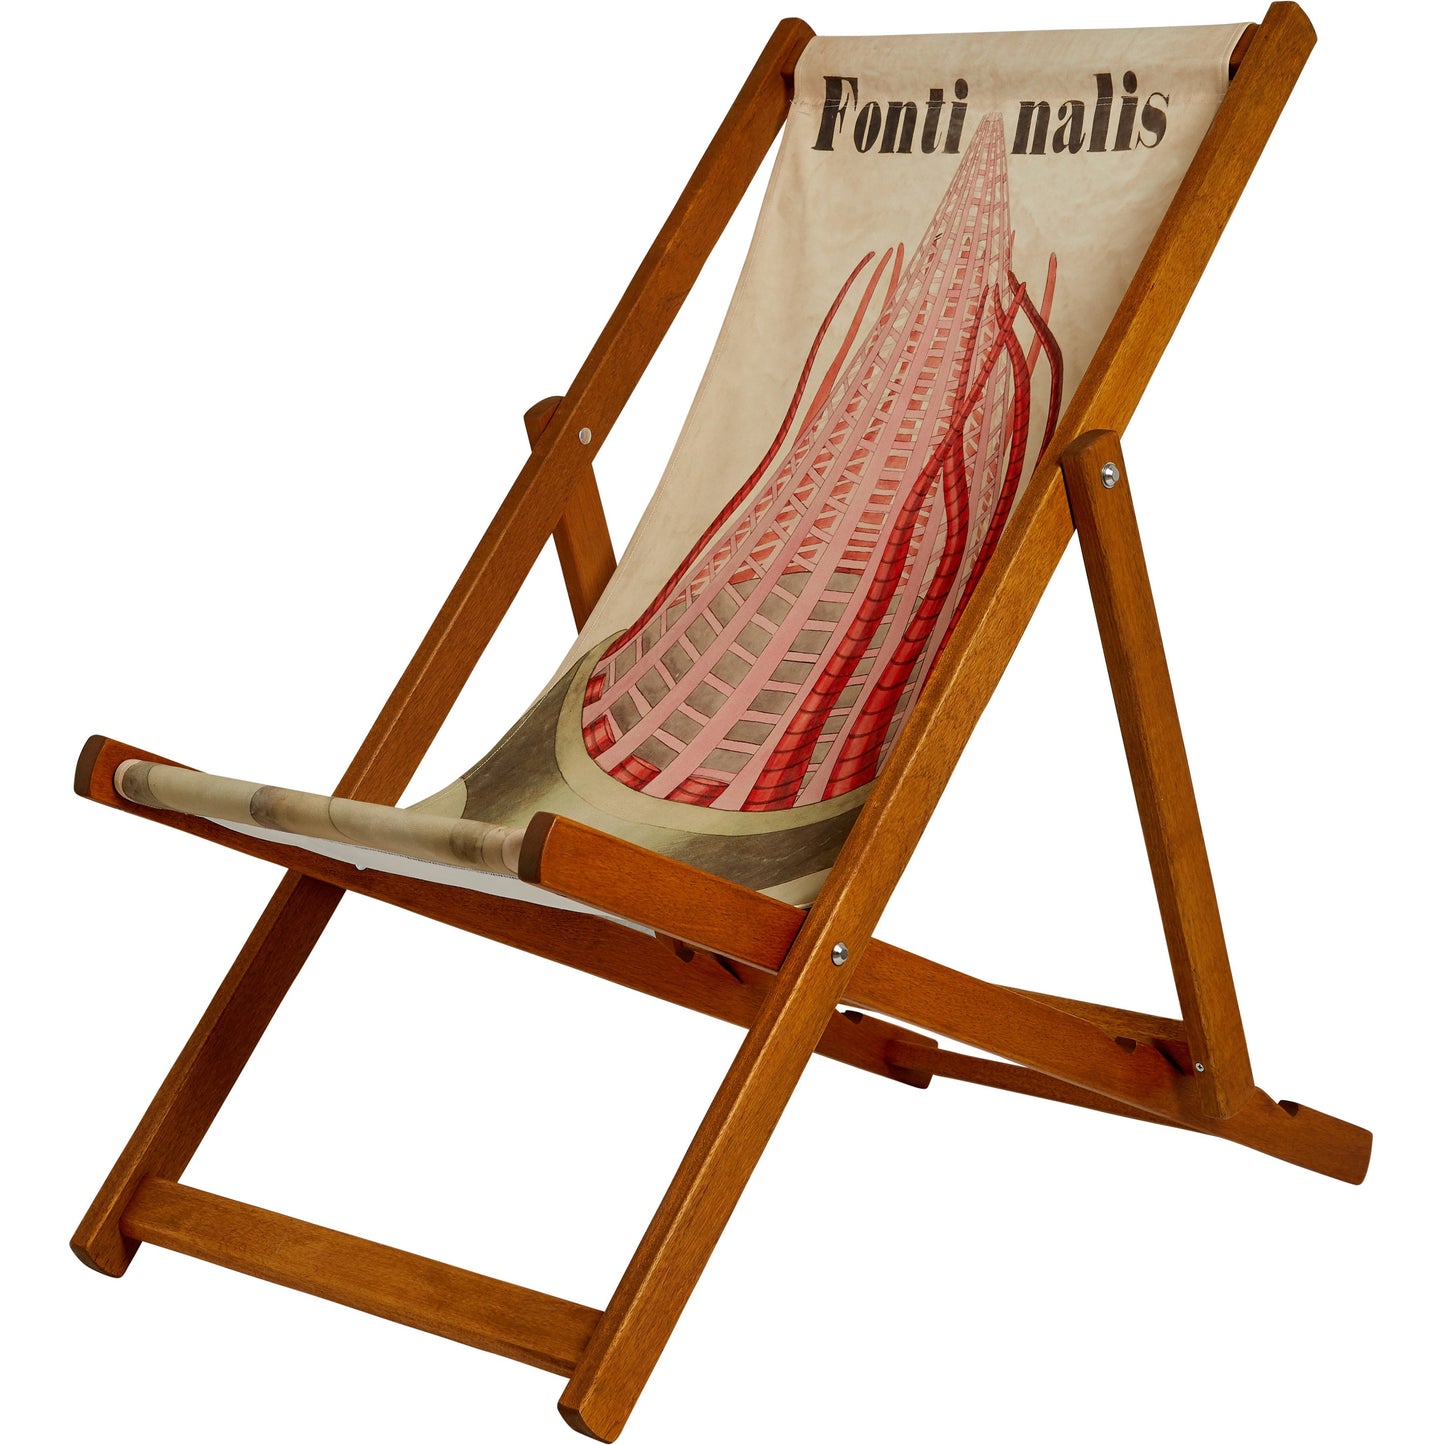 Deckchair with illustration Fontinalis by John Stevens Henslow. From the collection of the Whipple Museum of the History of Science, brought to you by CuratingCambridge.com